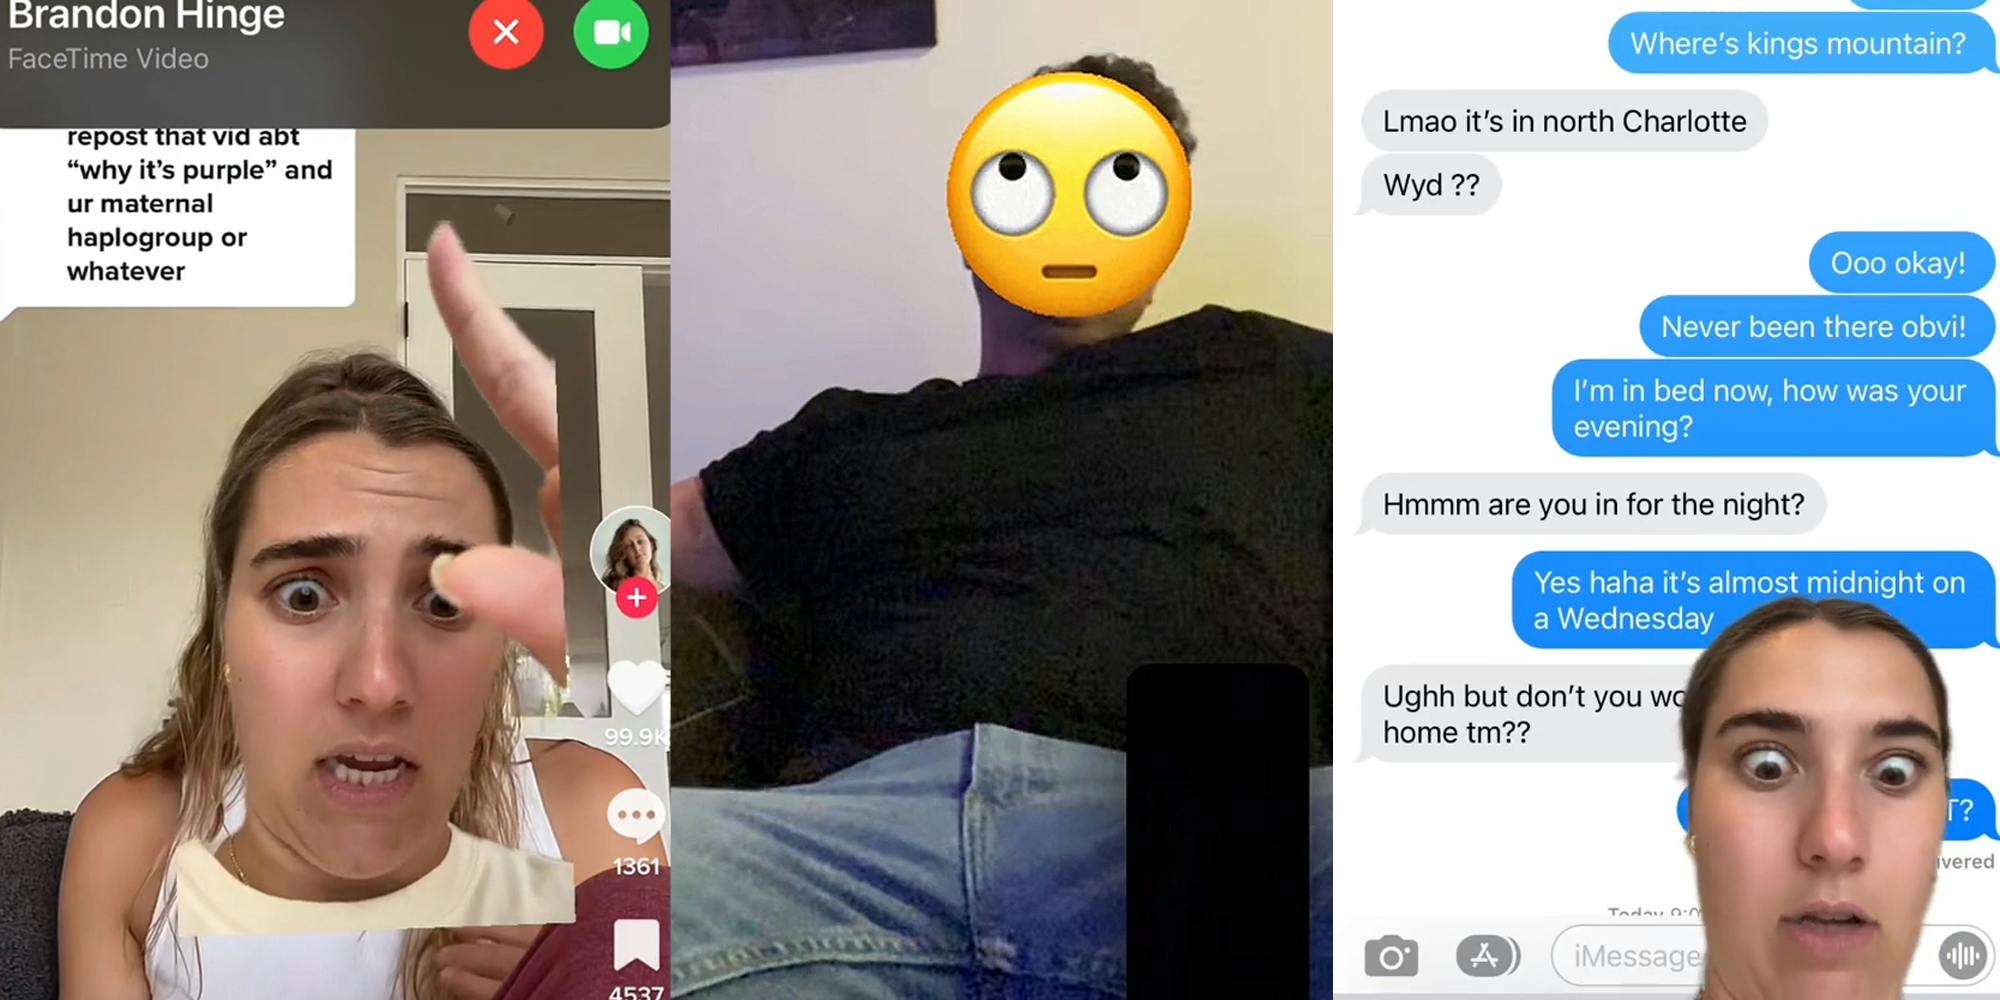 Woman greenscreen TikTok pointing to incoming facetime call while on TikTok from "Brandon Hinge" caption "repost that vid abt "why it's purple" and ur maternal haplogroup or whatever" (l) man on facetime manspreading legs with emoji censoring his face (c) woman greenscreen TikTok over text messages "Where's kings mountain? Lmao it's in north Charlotte Wyd?? Ooo okay! Never been there obvi! I'm in bed now, how was your evening? Hmmm are you in for the night? Yes haha it's almost midnight on a Wednesday Ughh but don't you work from home tm??" (r)